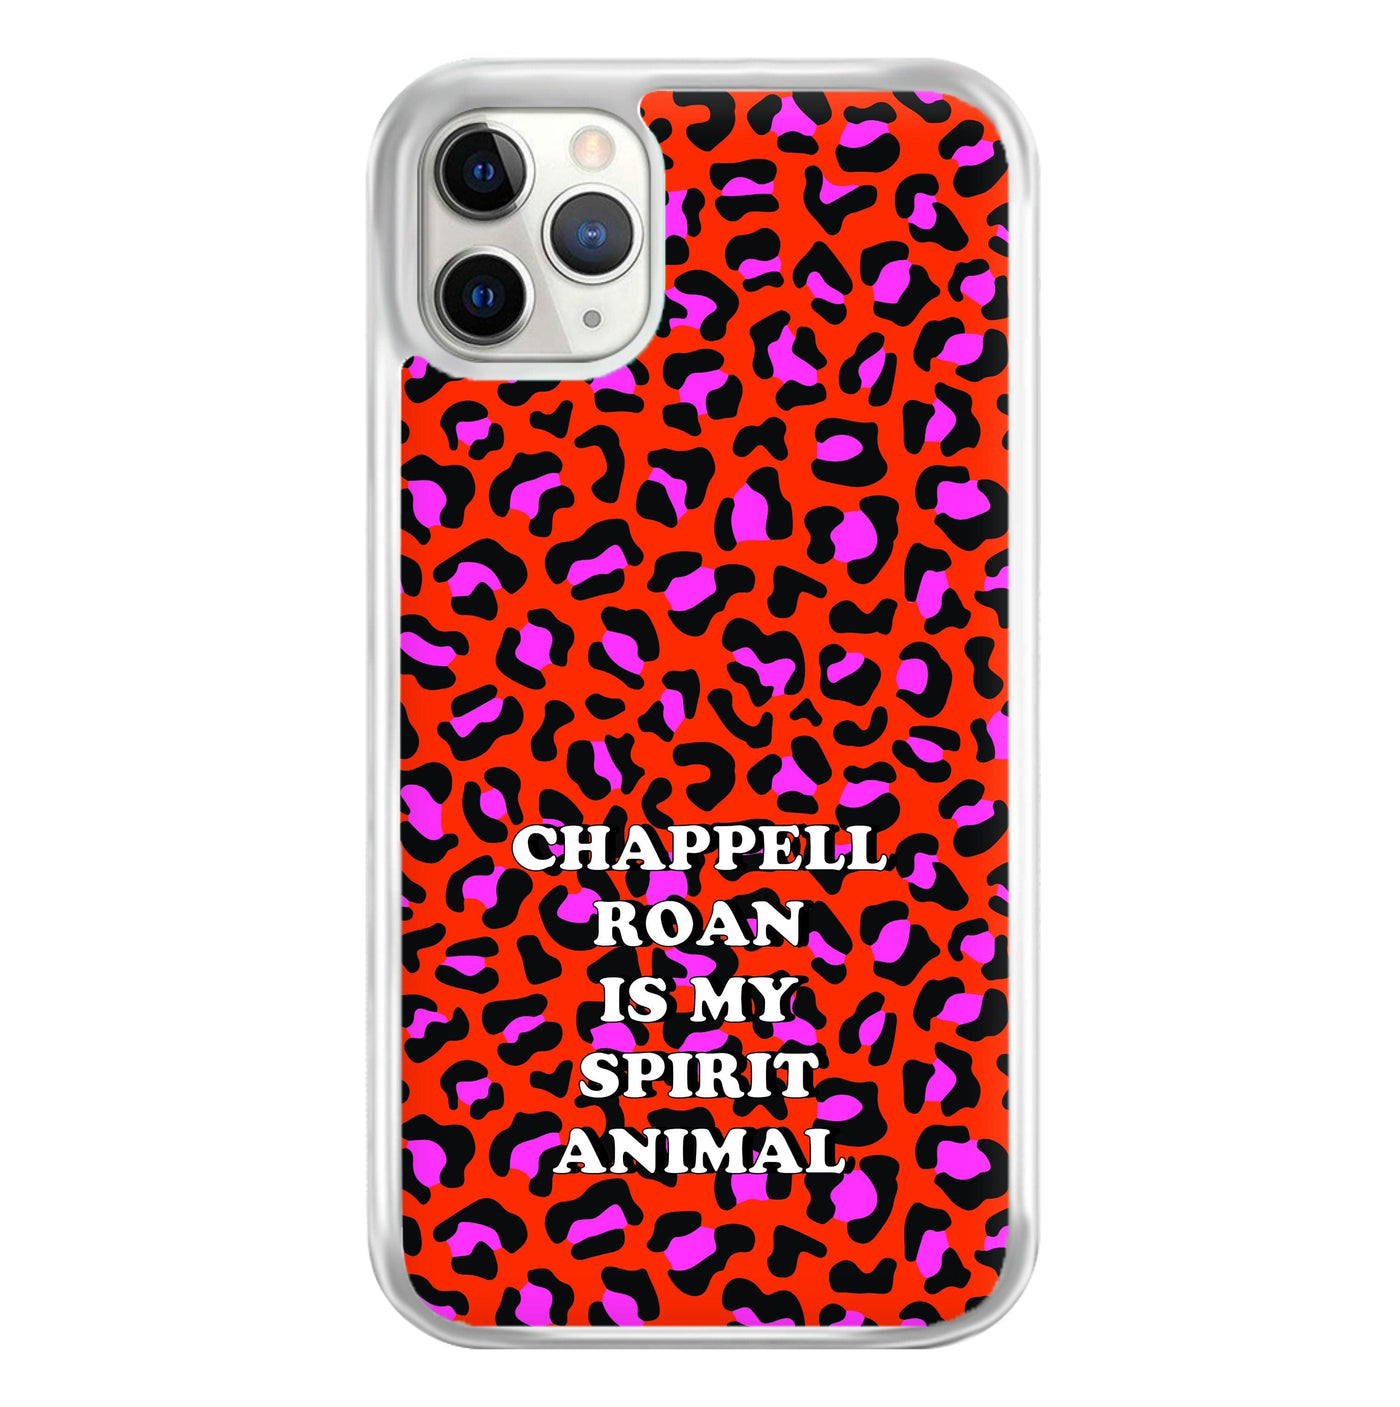 Chappell Roan Is My Spirit Animal Phone Case